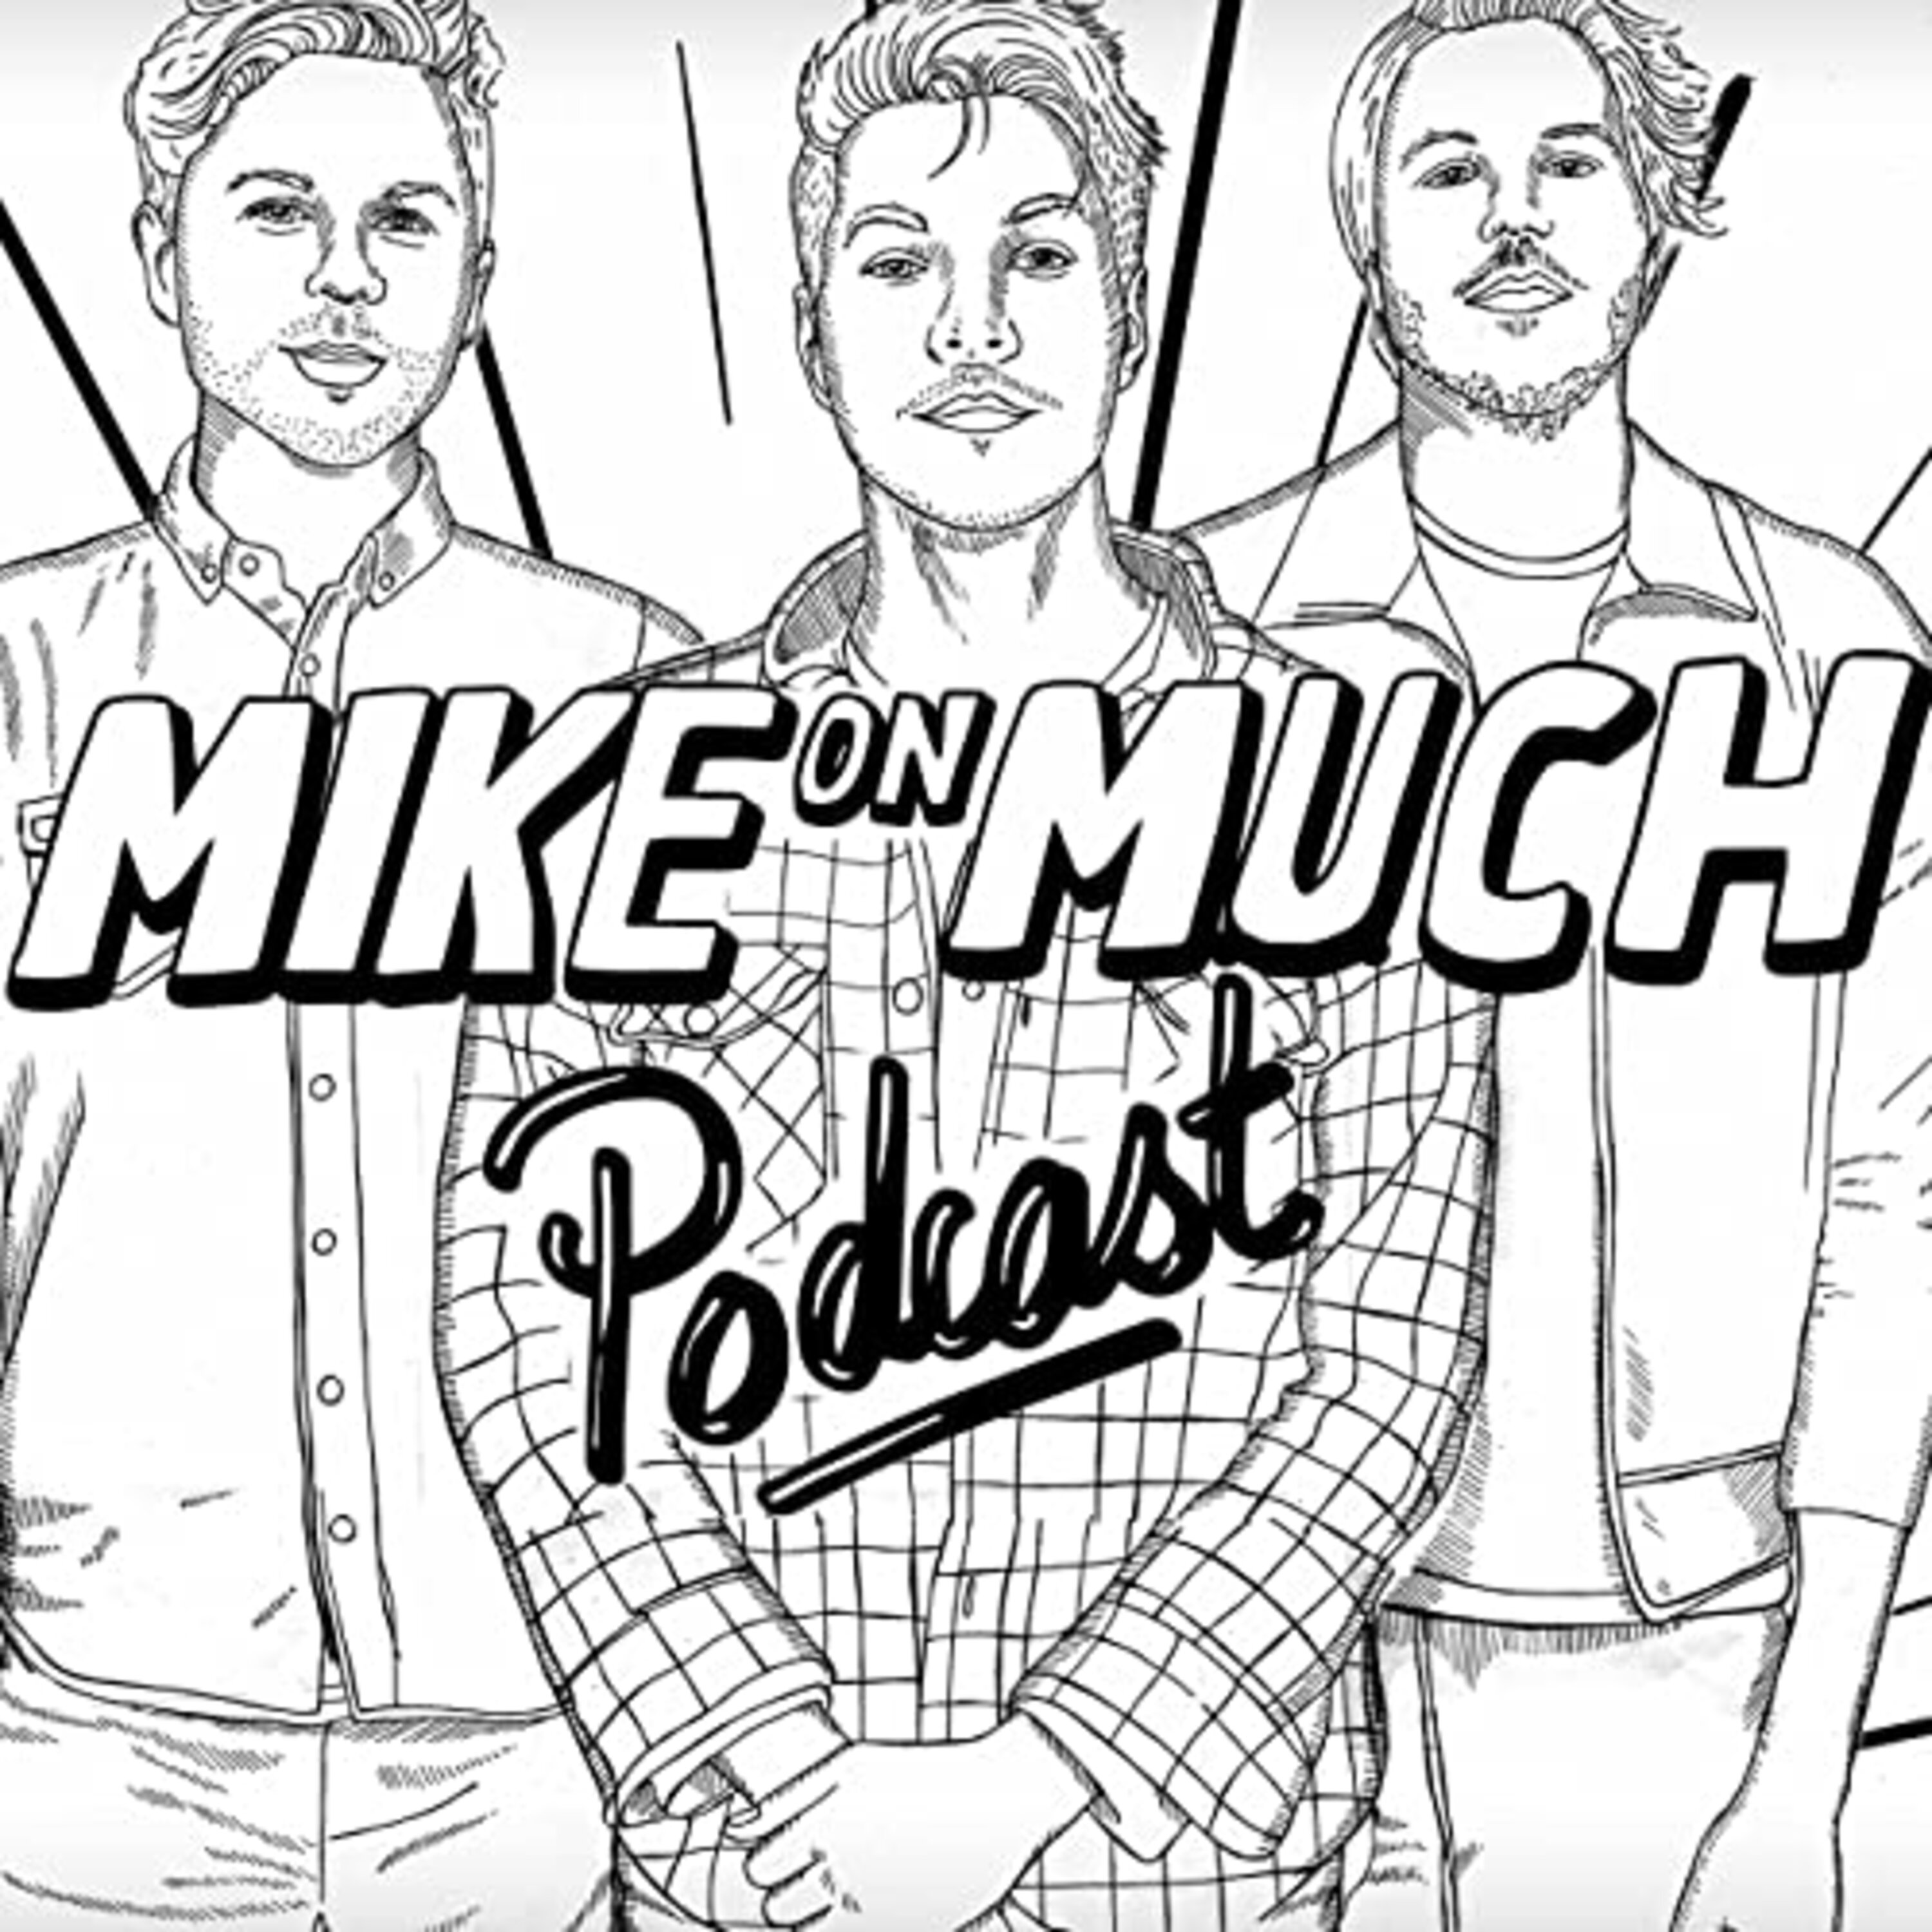 Season 1 Mike On Much: “This Isn’t Goodbye”